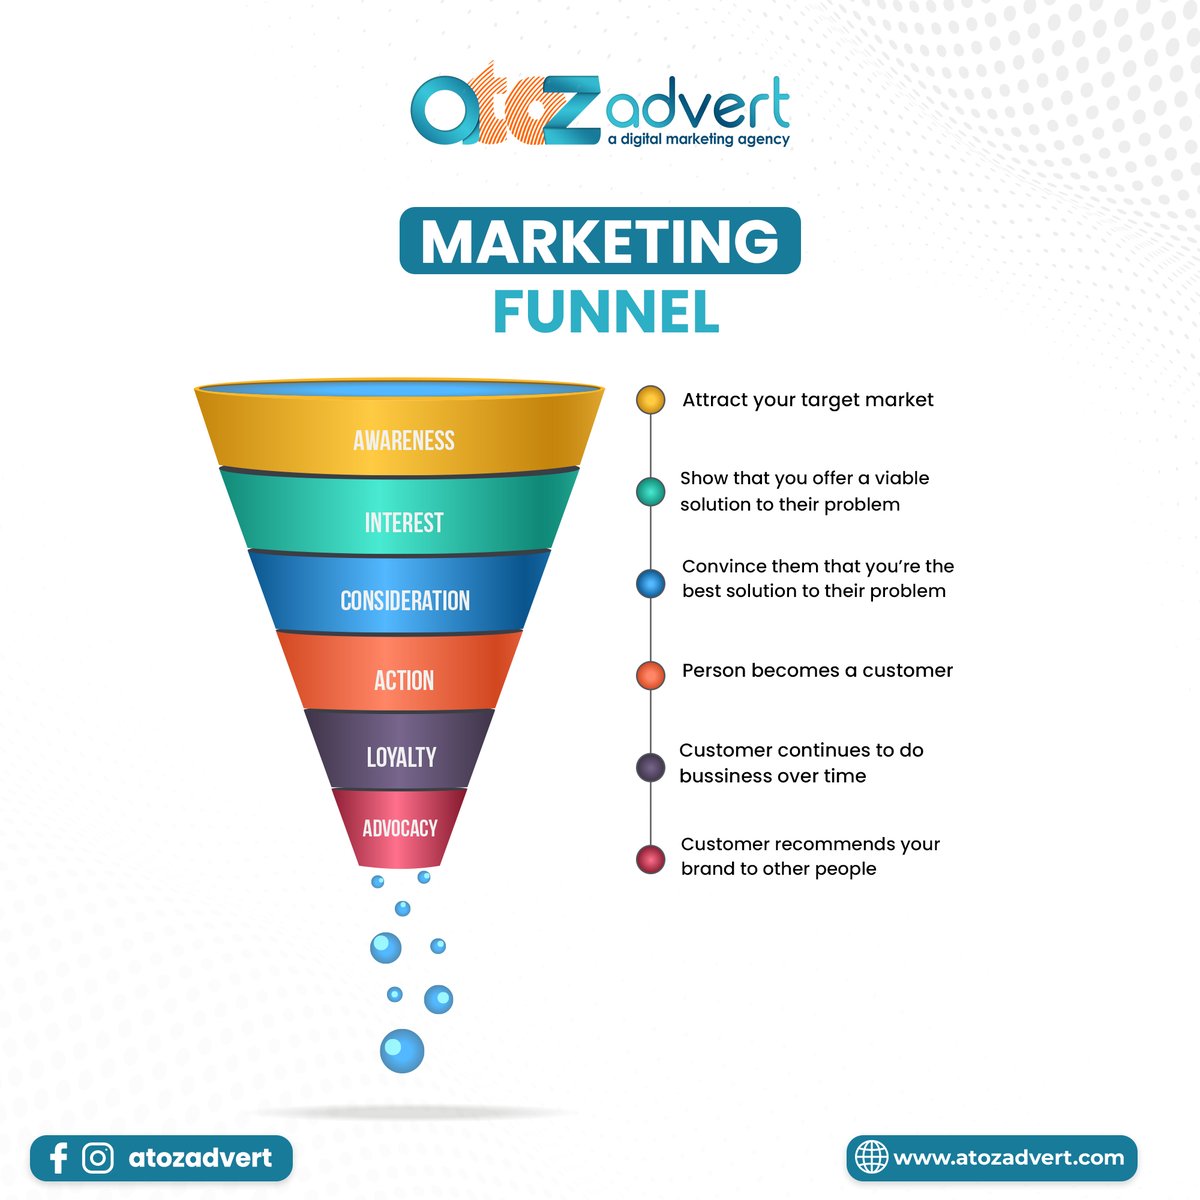 A marketing funnel is a visual representation of the stages a customer goes through, from first knowing about your brand to becoming a customer.
#Digital #DigitalMarketing #Branding #AtozAdvert #Advertising #marketingfunnel #salesfunnel